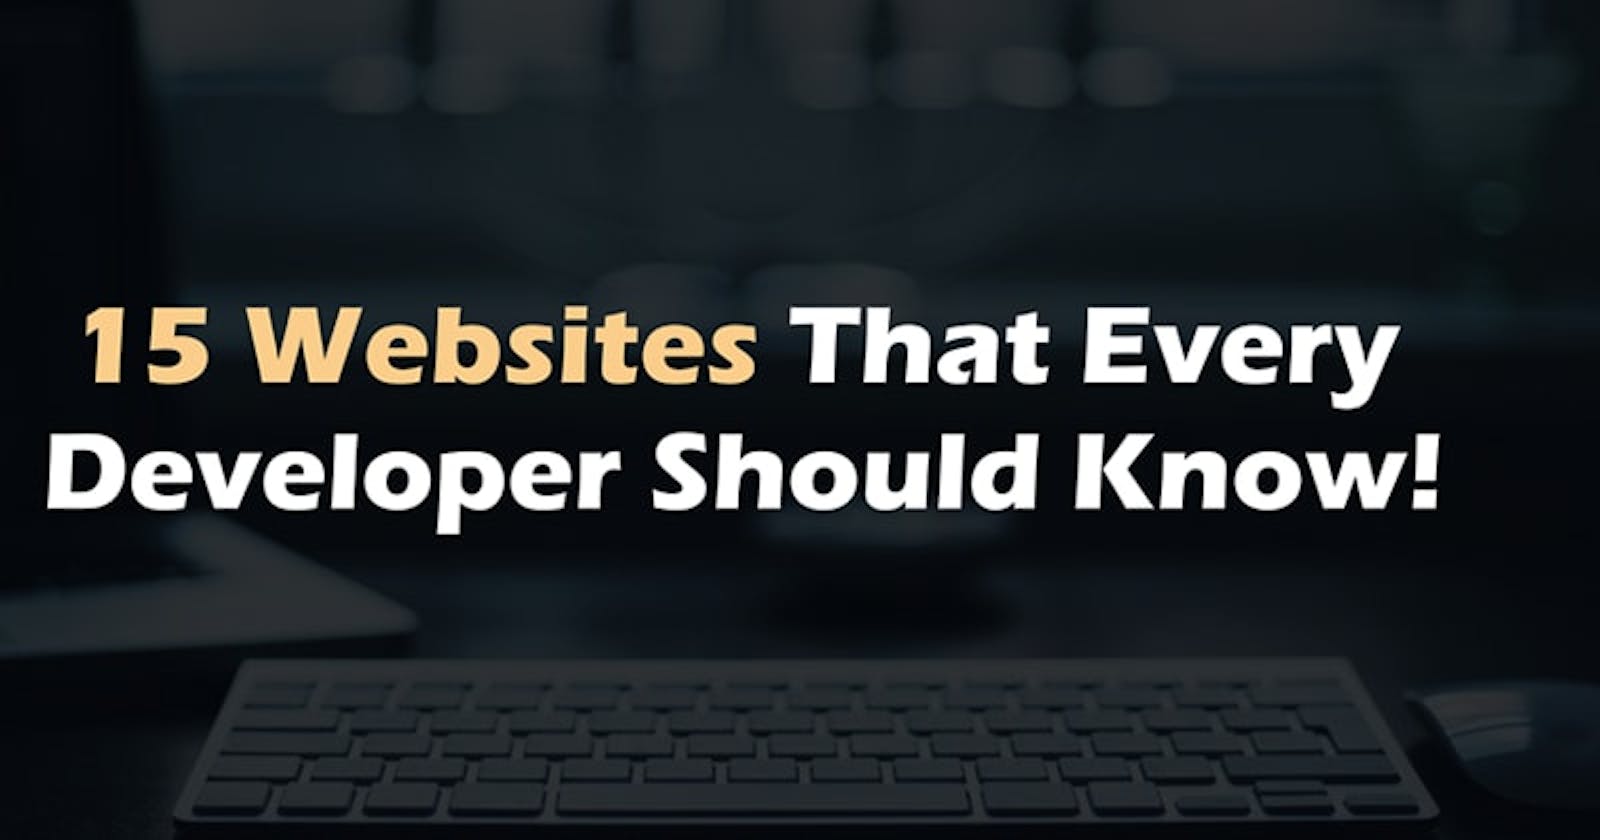 15 Websites That Every Developer Should Know!